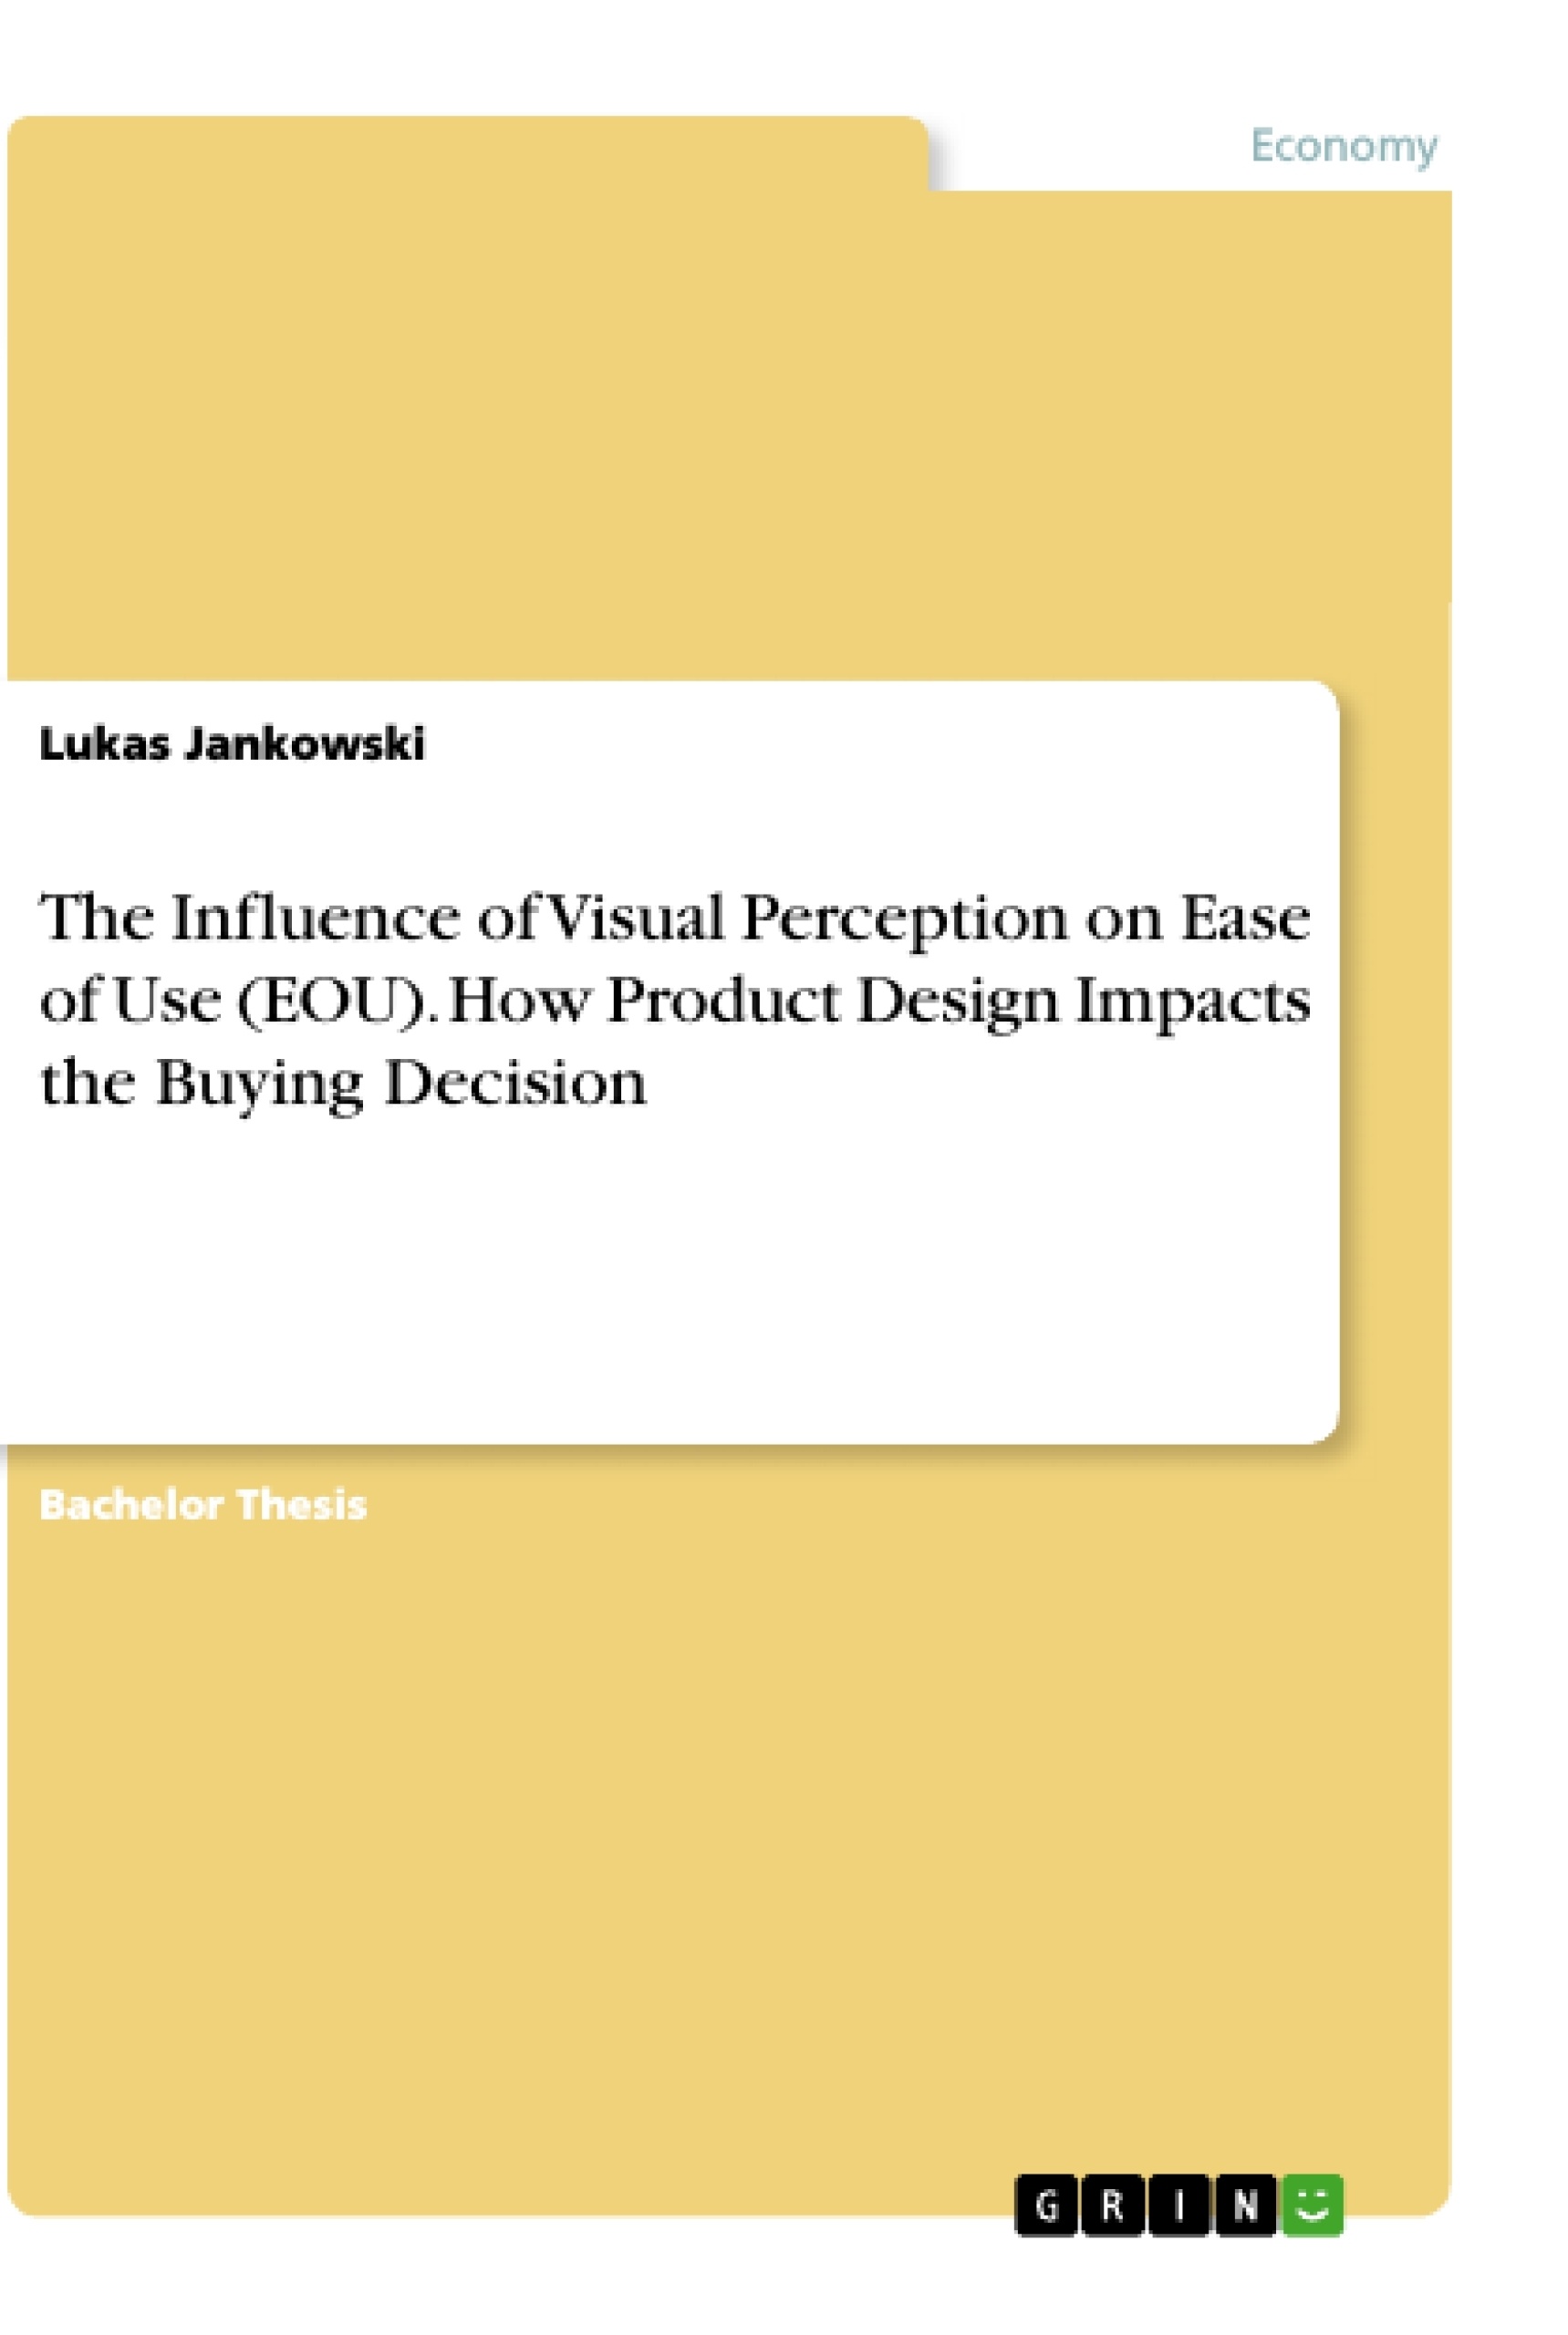 Title: The Influence of Visual Perception on Ease of Use (EOU). How Product Design Impacts the Buying Decision